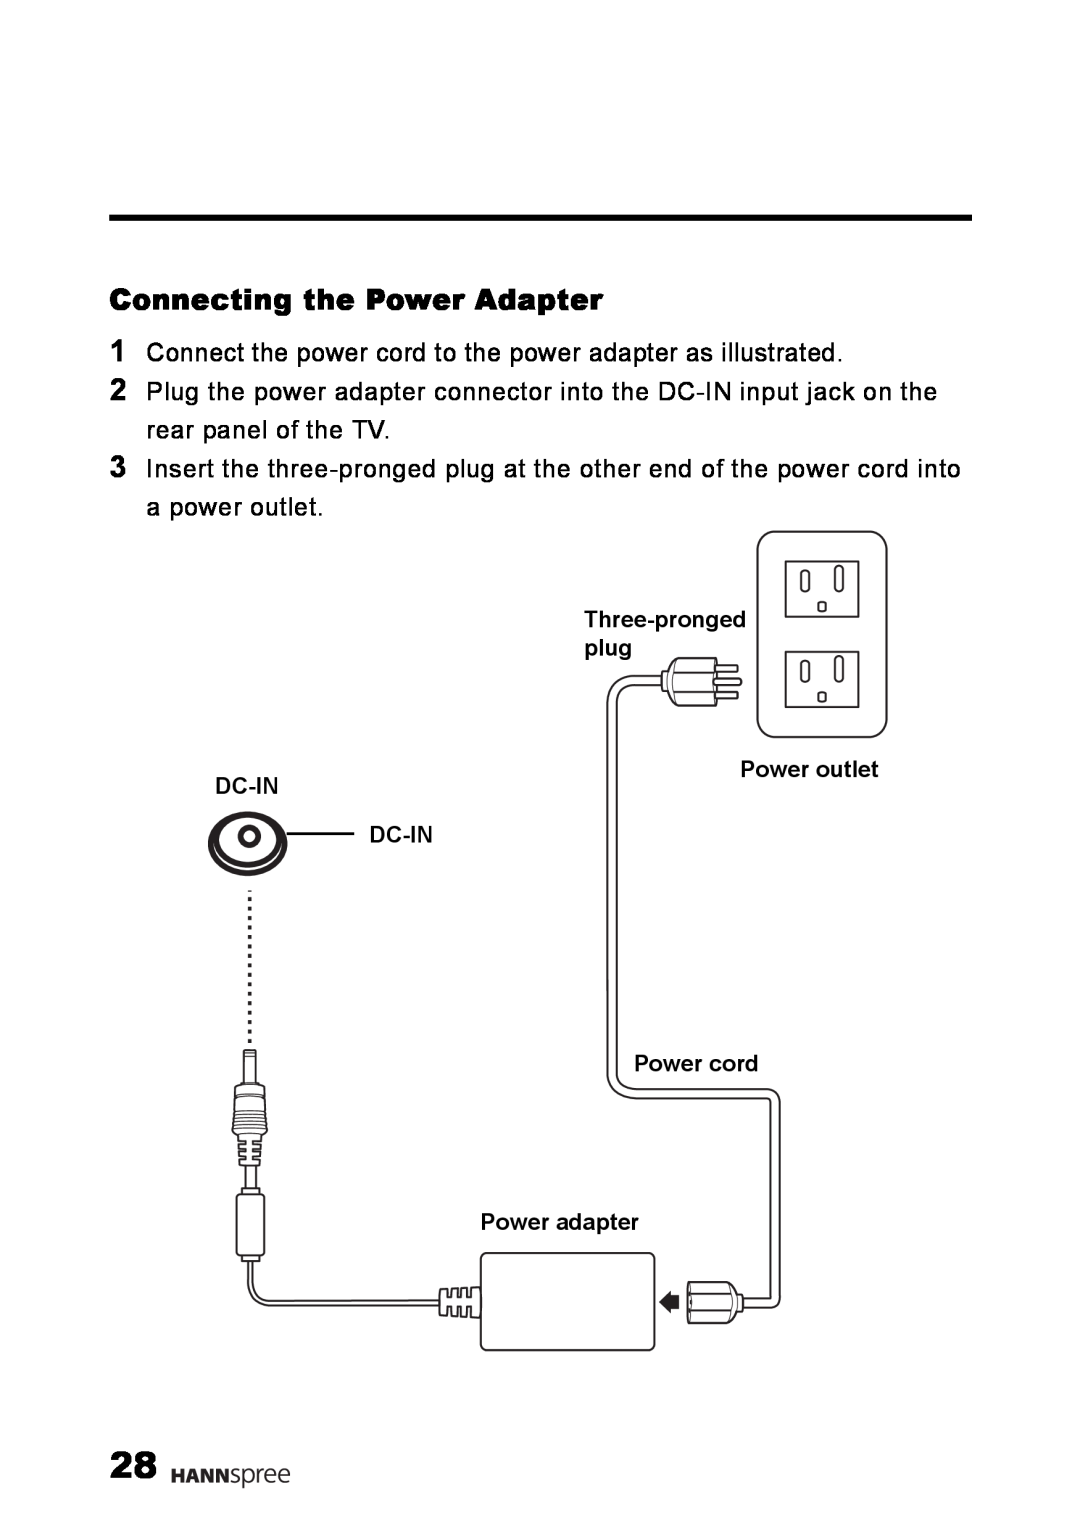 HANNspree LT09-10U1-000 user manual Connecting the Power Adapter, DC-IN input jack 